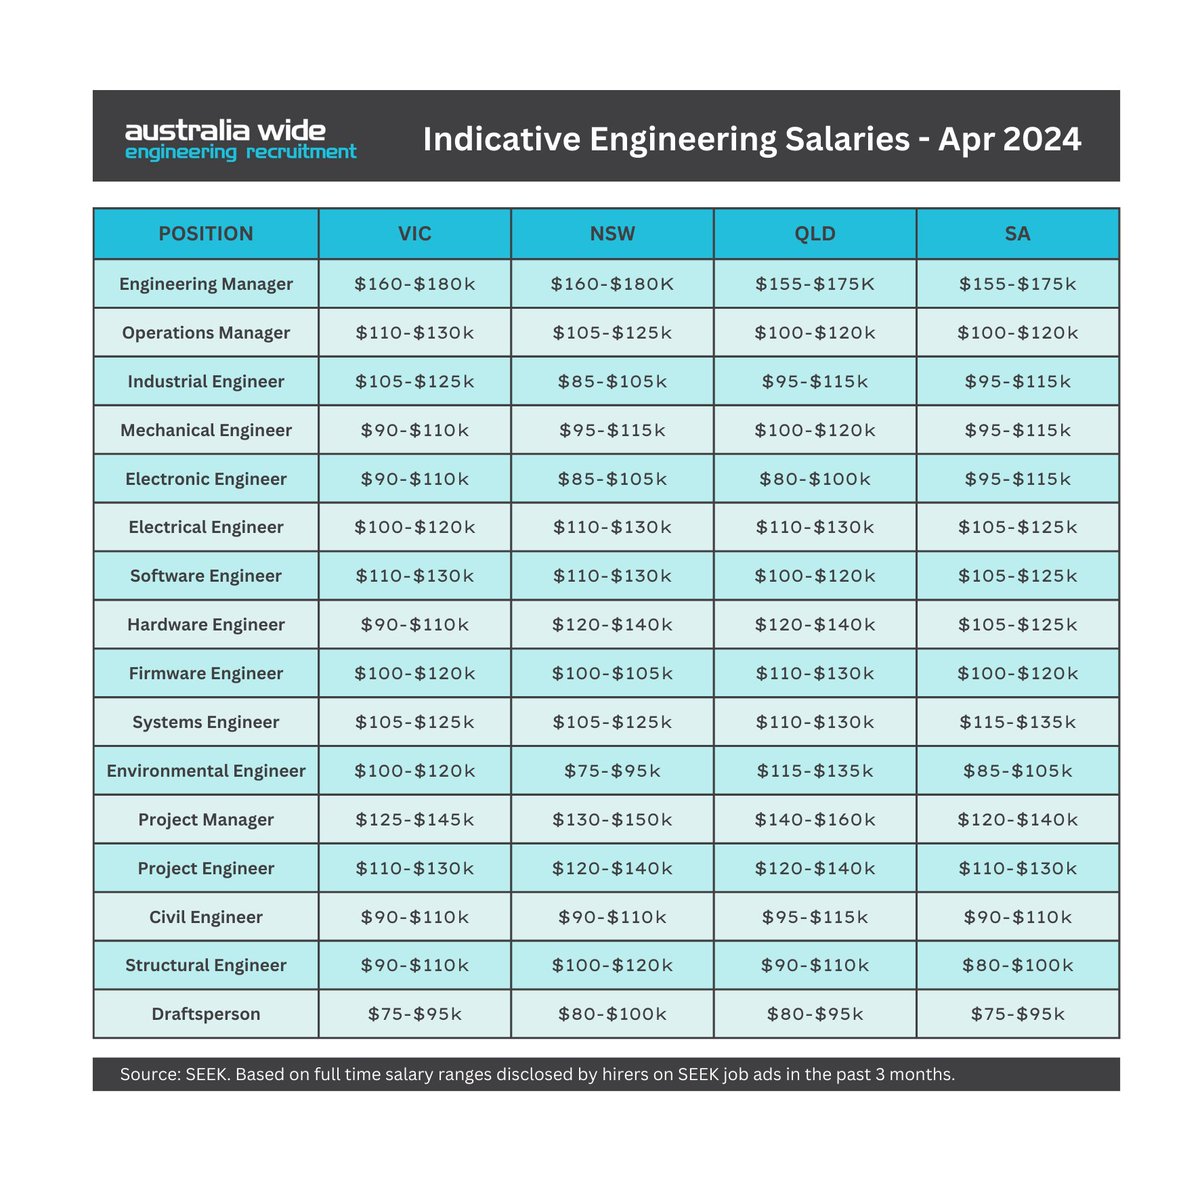 Australia Wide Engineering Recruitment have released the April Quarterly Engineering Recruitment Commentary. Link to the Commentary is in first comment below.
#engineeringjobs #engineeringrecruitment #engineeringsalaries